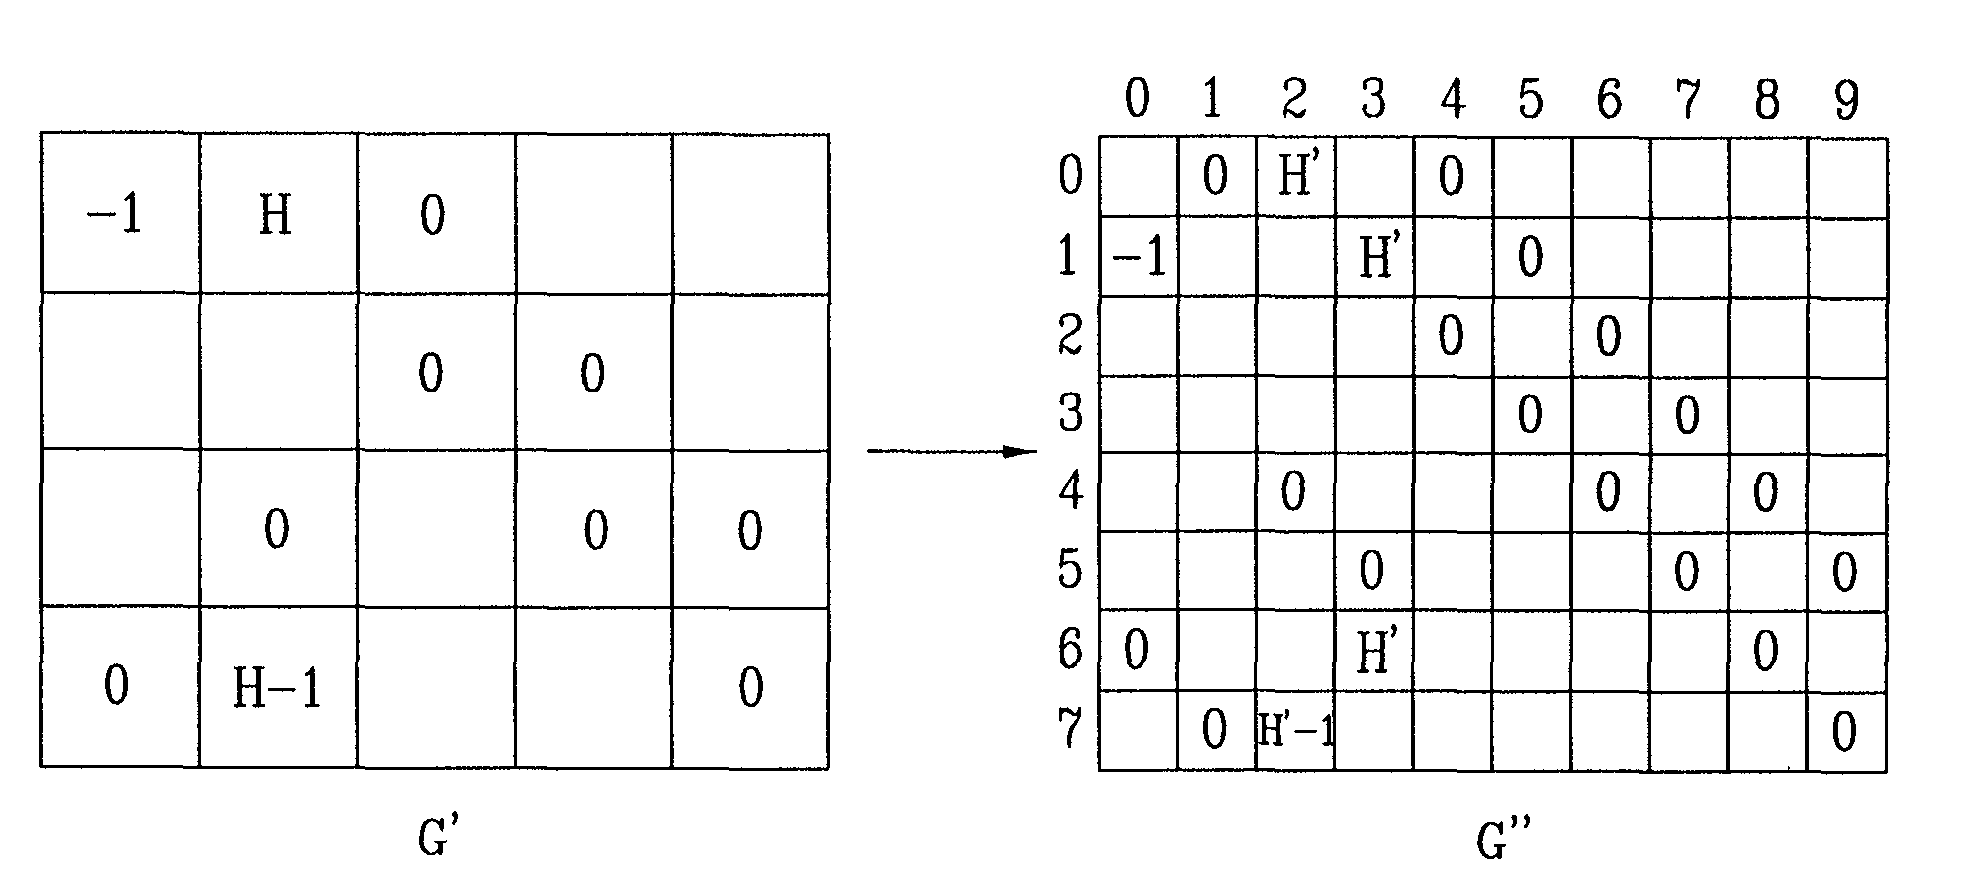 Method of generating a parity check matrix for LDPC encoding and decoding